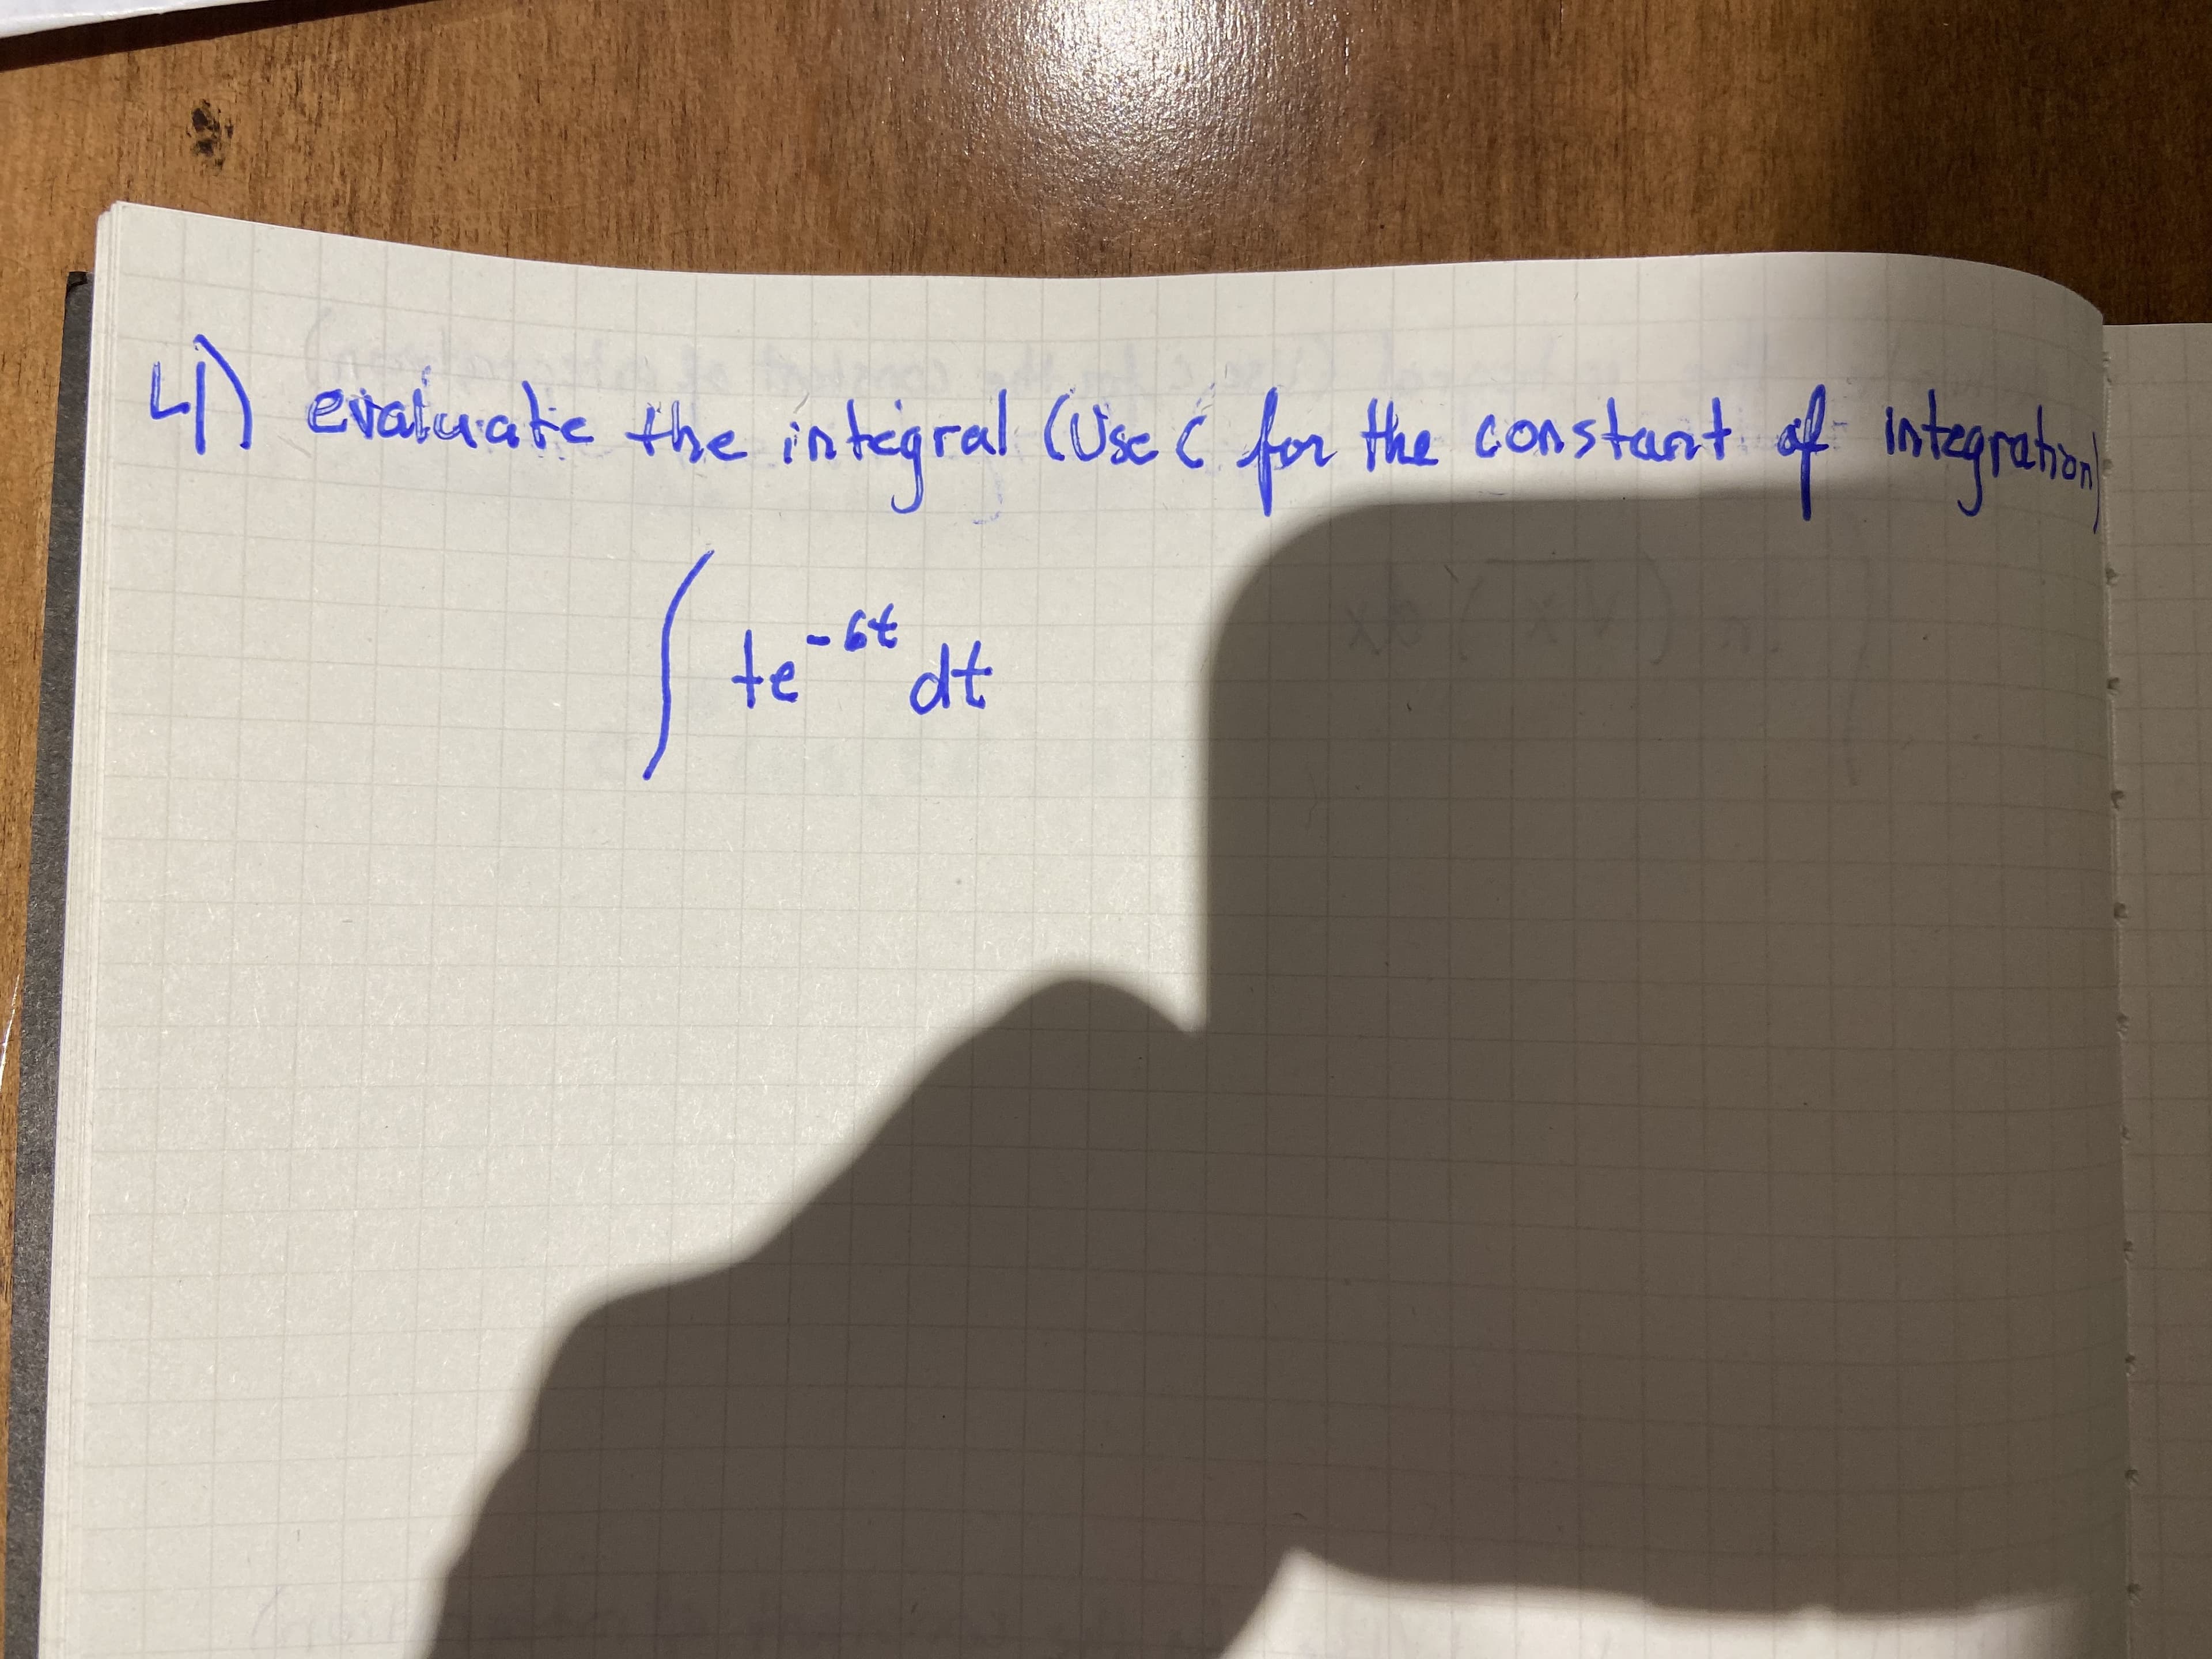 evalicuate the int
integral
(Usc ( for
integratal
the constant in
te
-6t
e dt
